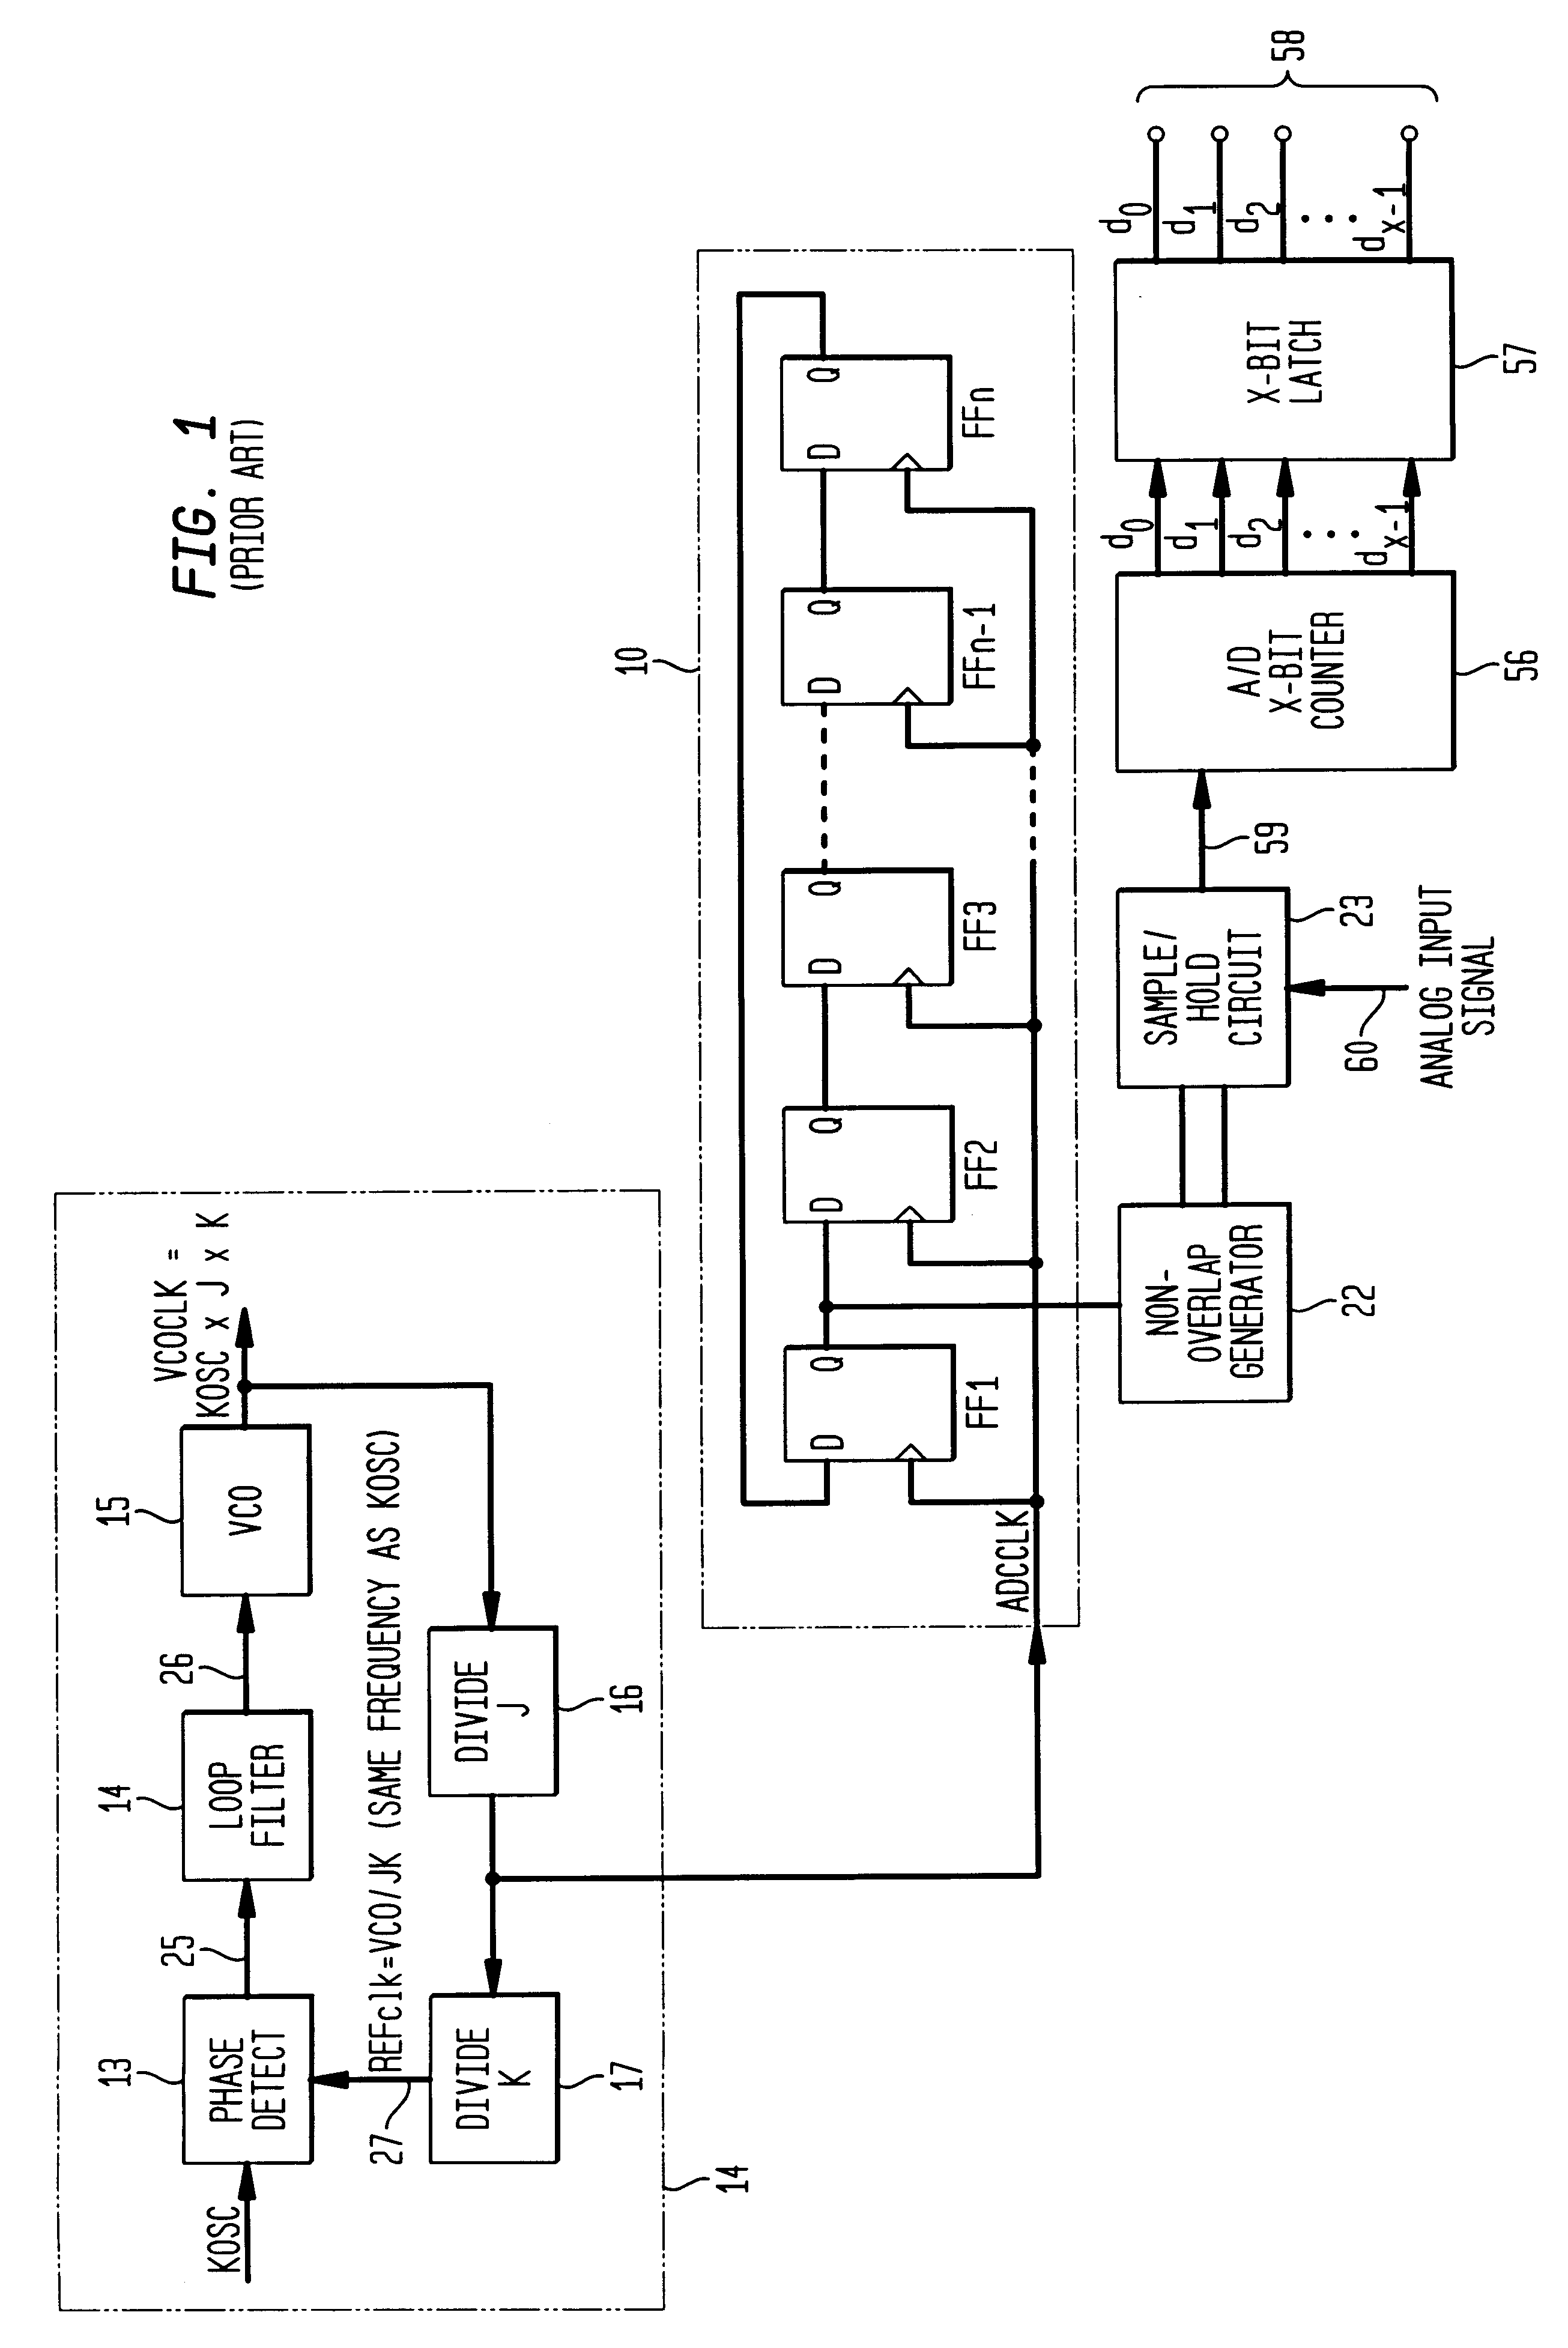 Clocking technique for reducing sampling noise in an analog-to-digital converter